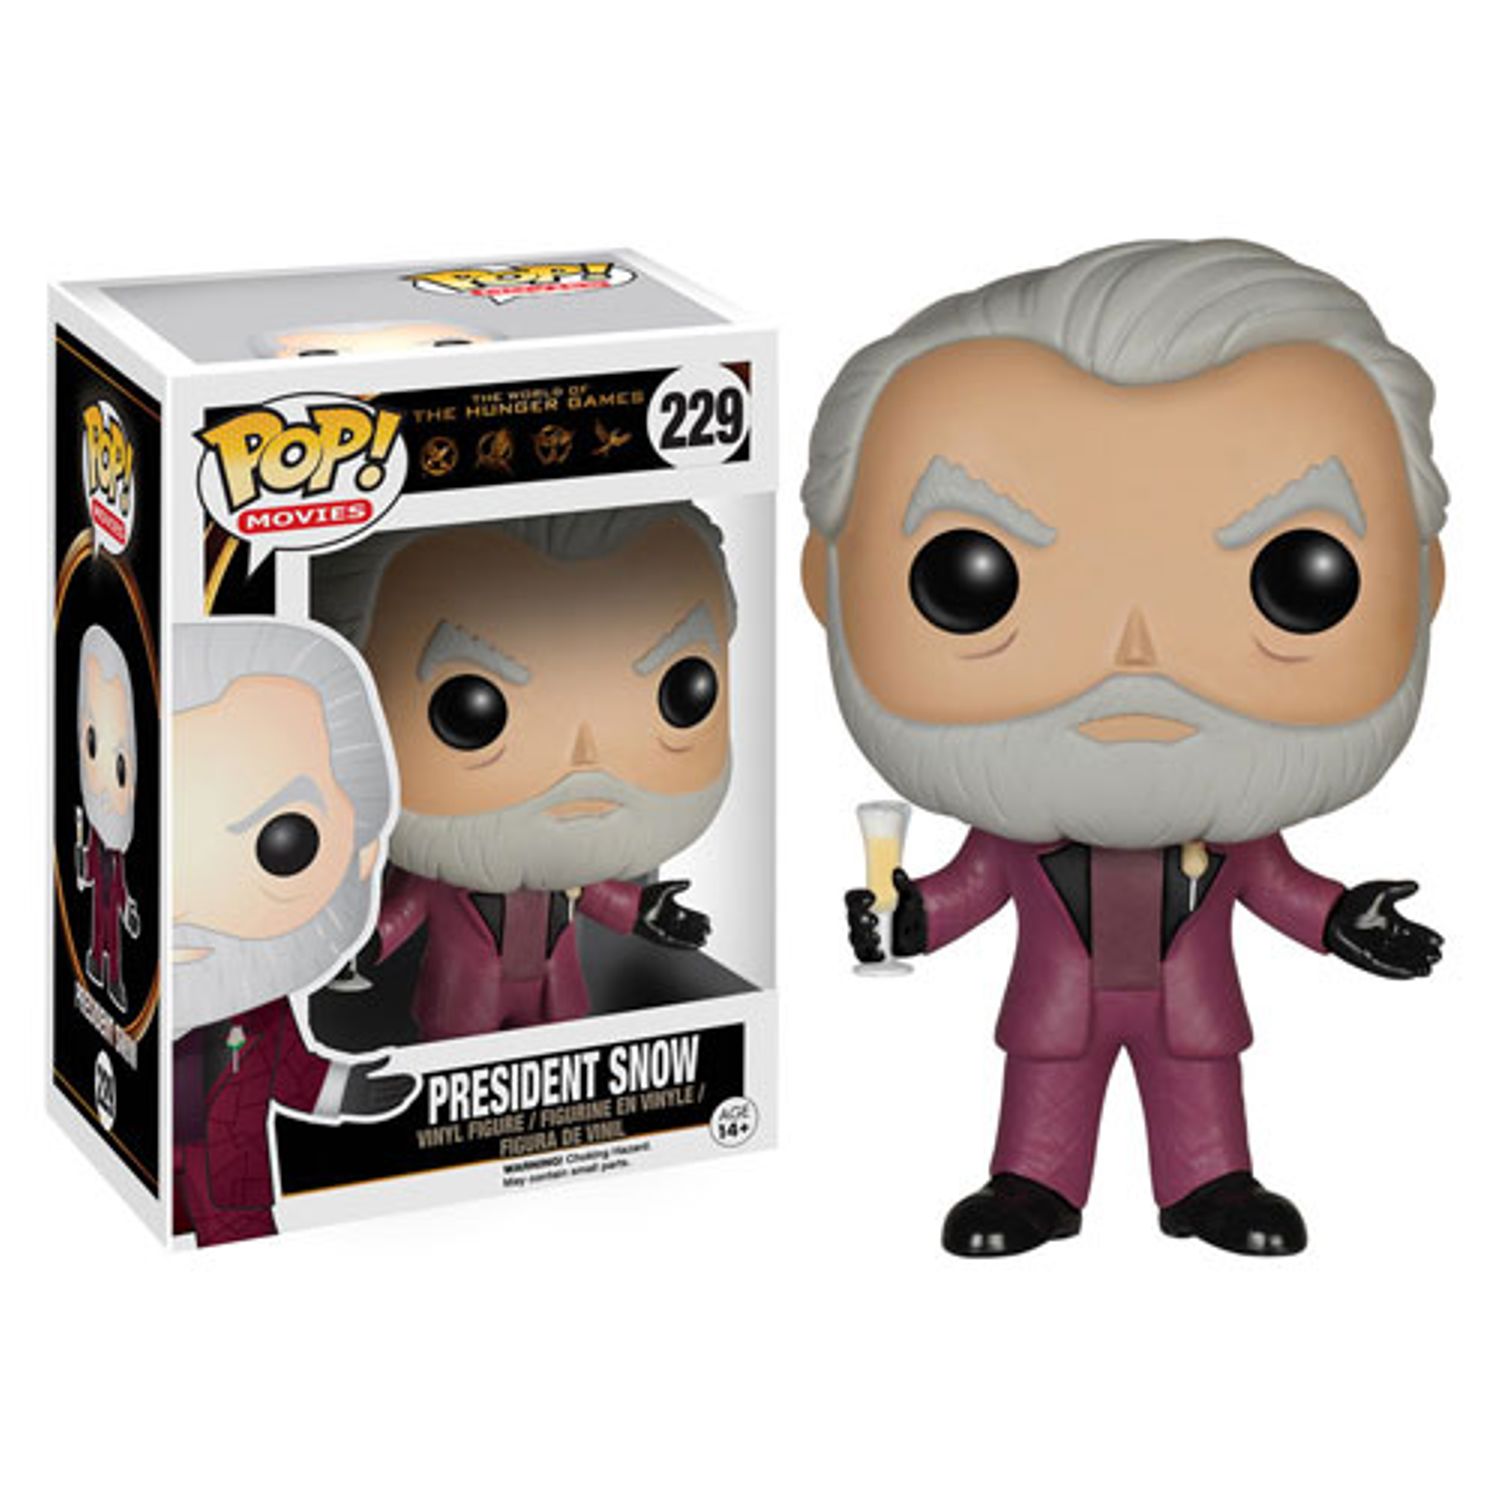 Funko The Hunger Games - President Snow POP Figure Collectible Vinyl Toy - 2x3.5 - image 1 of 3